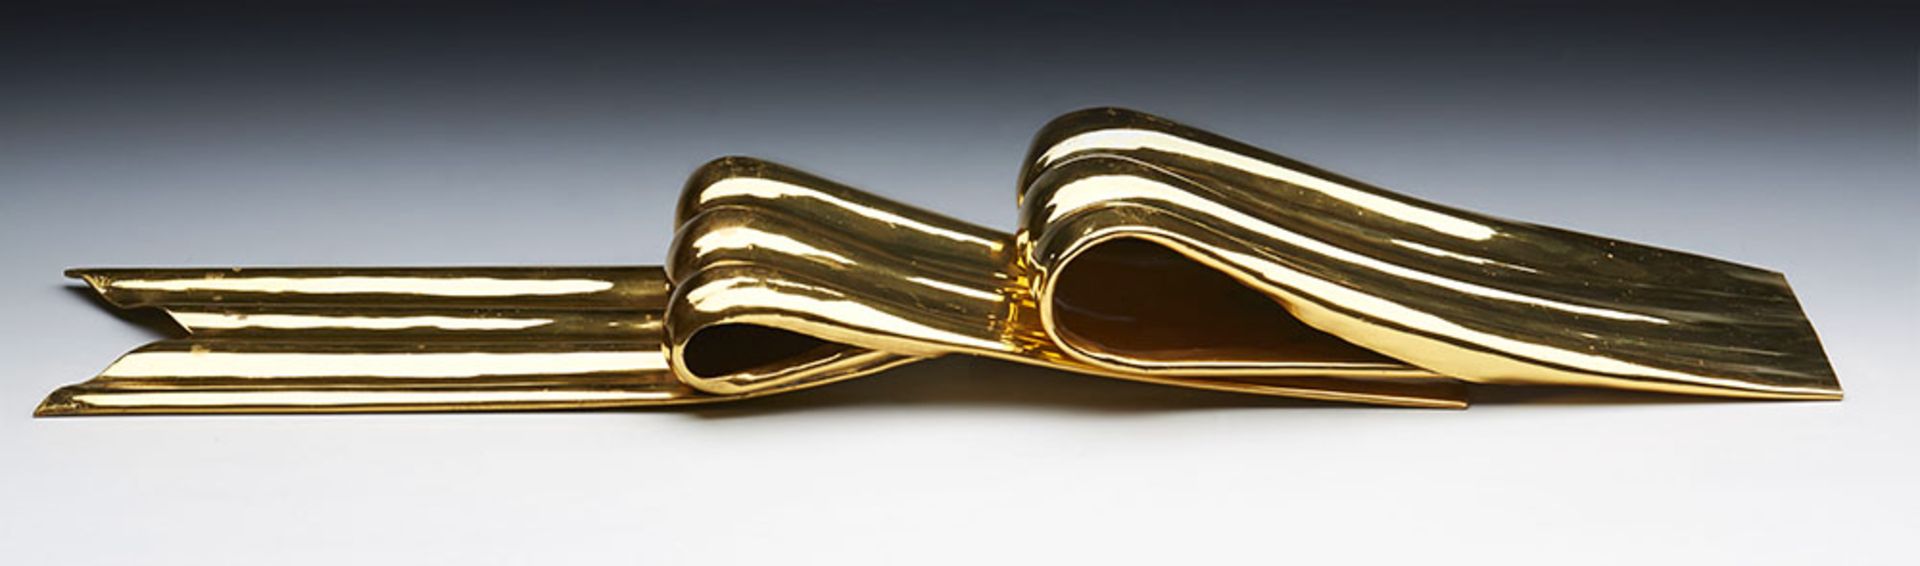 DULANY STUDIO GILT METAL BOW BY HELEN HUGHES EARLY 20TH C. - Image 7 of 11